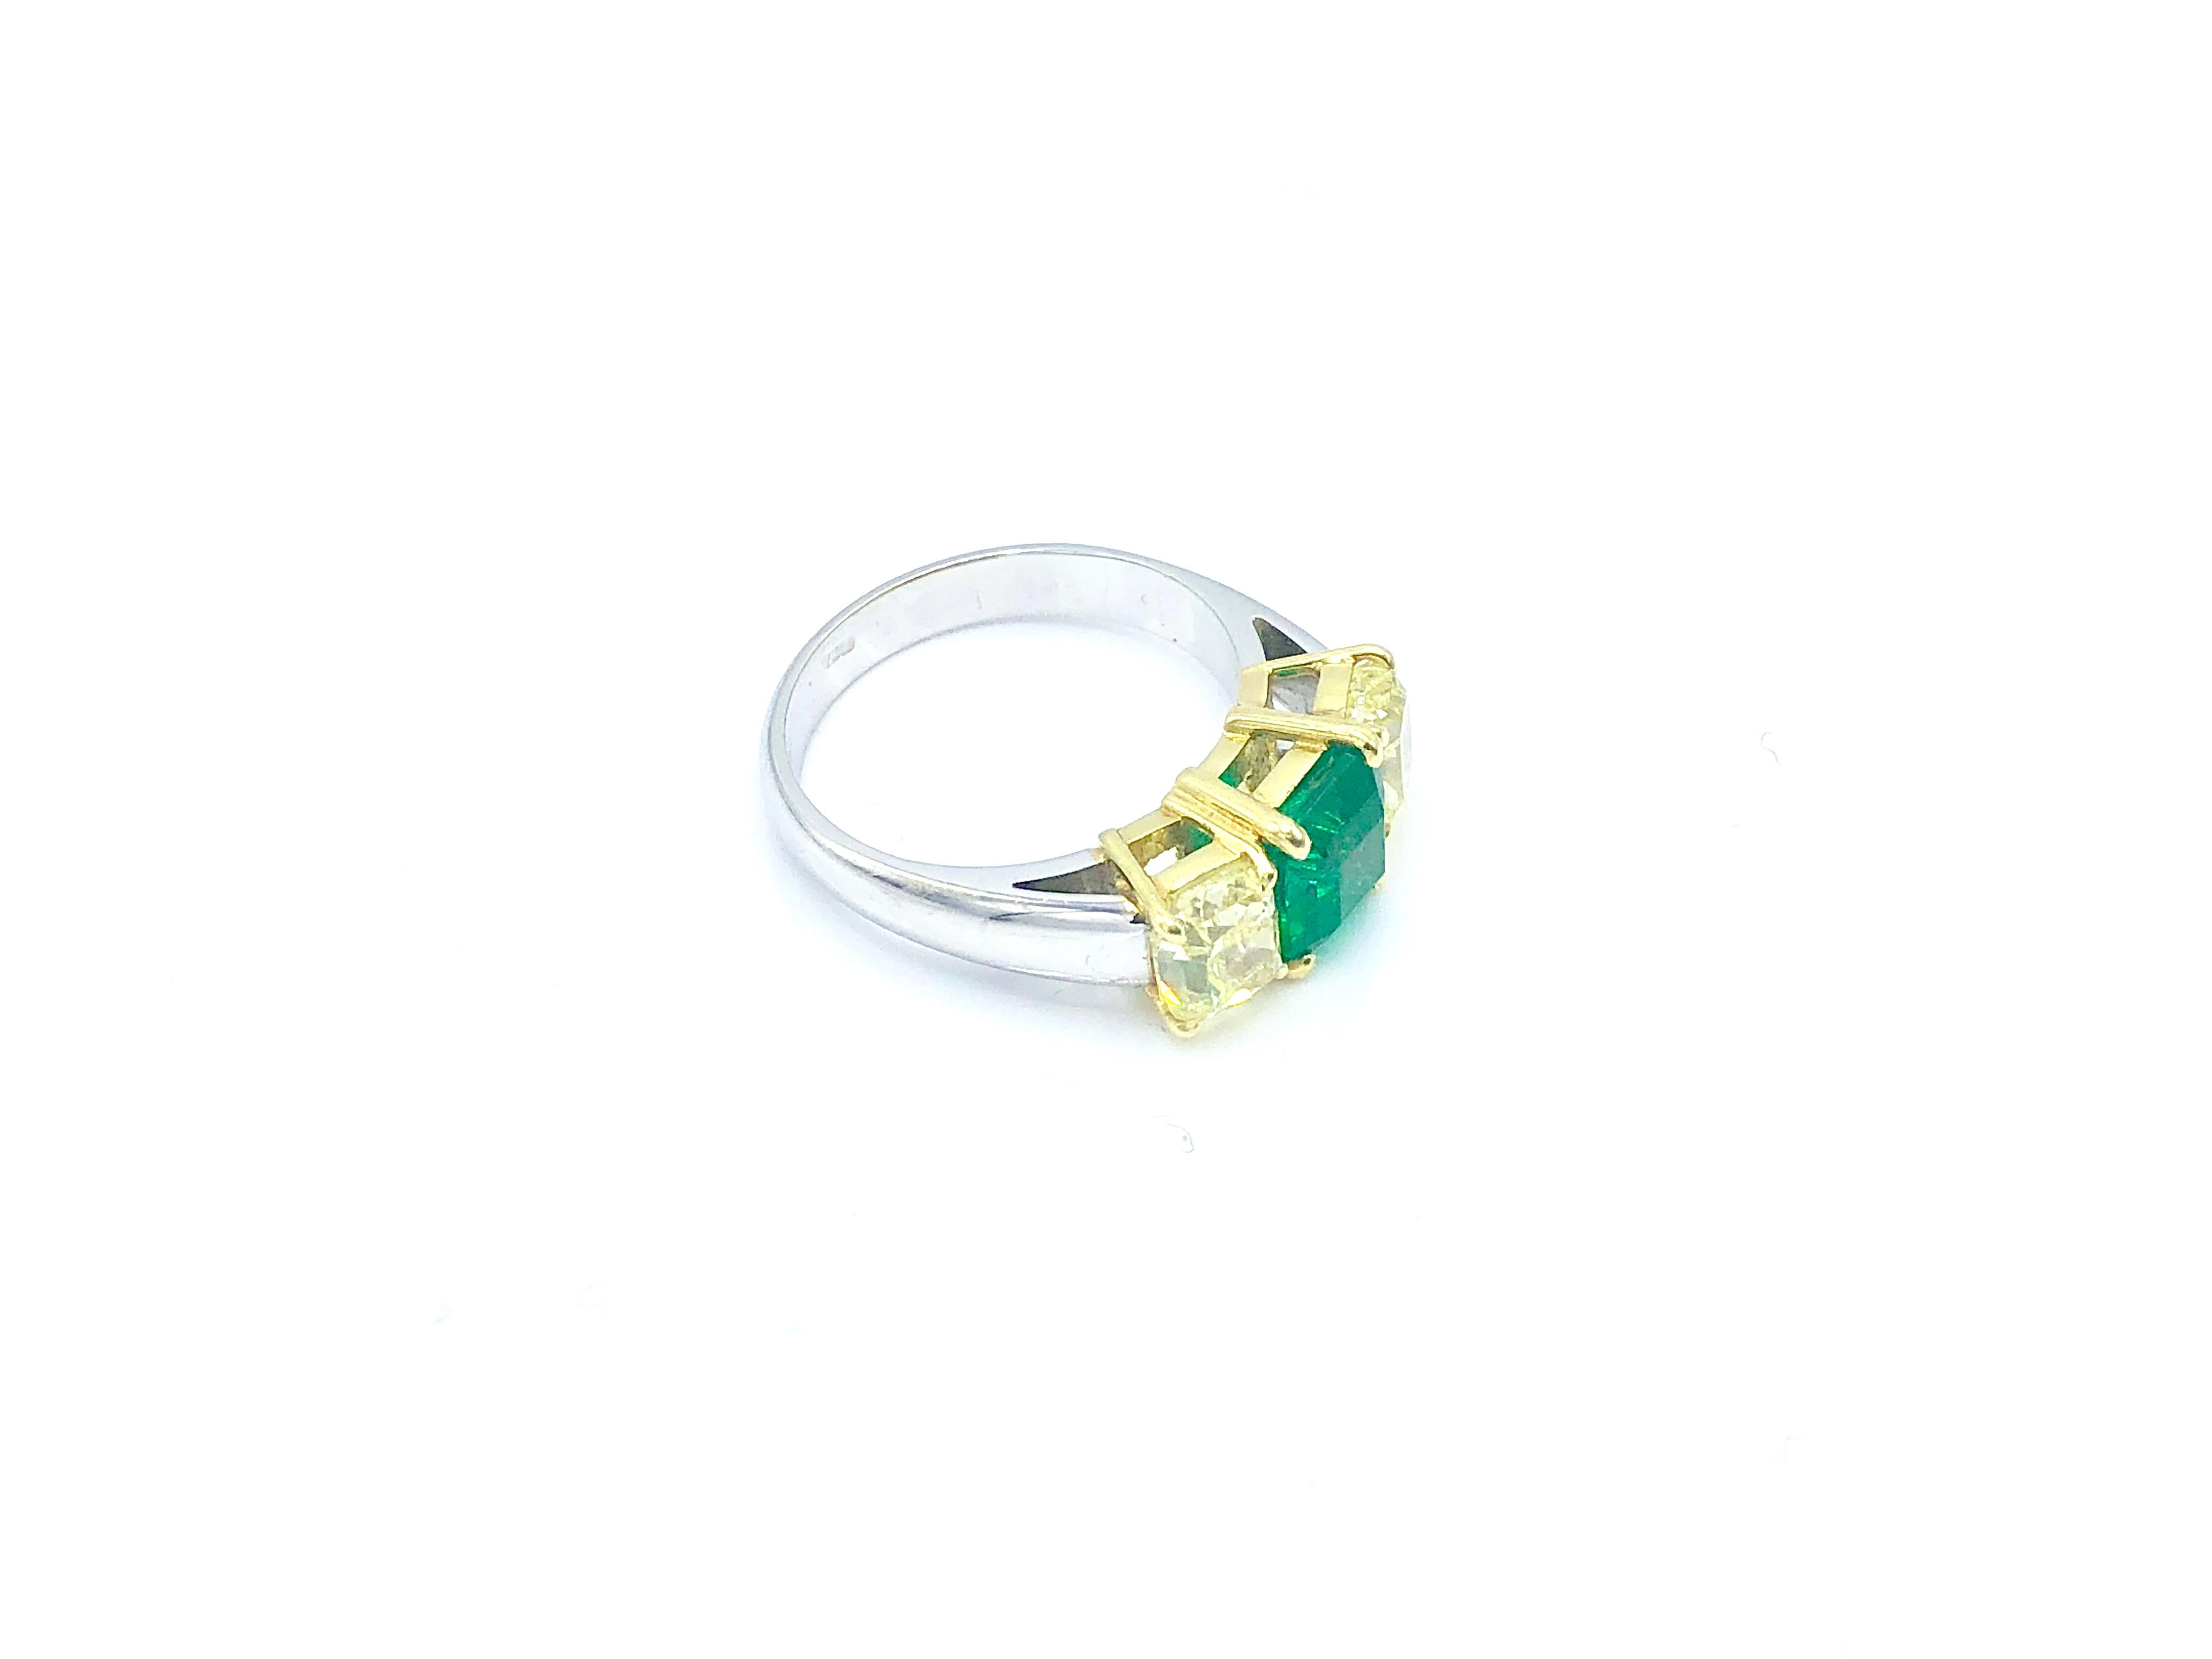 A three-stone ring set with a Colombian Emerald (1.39 ct) and 2 Fancy Yellow Diamonds (2.04 ct).

Size US 6 1/4 - IT 12,5